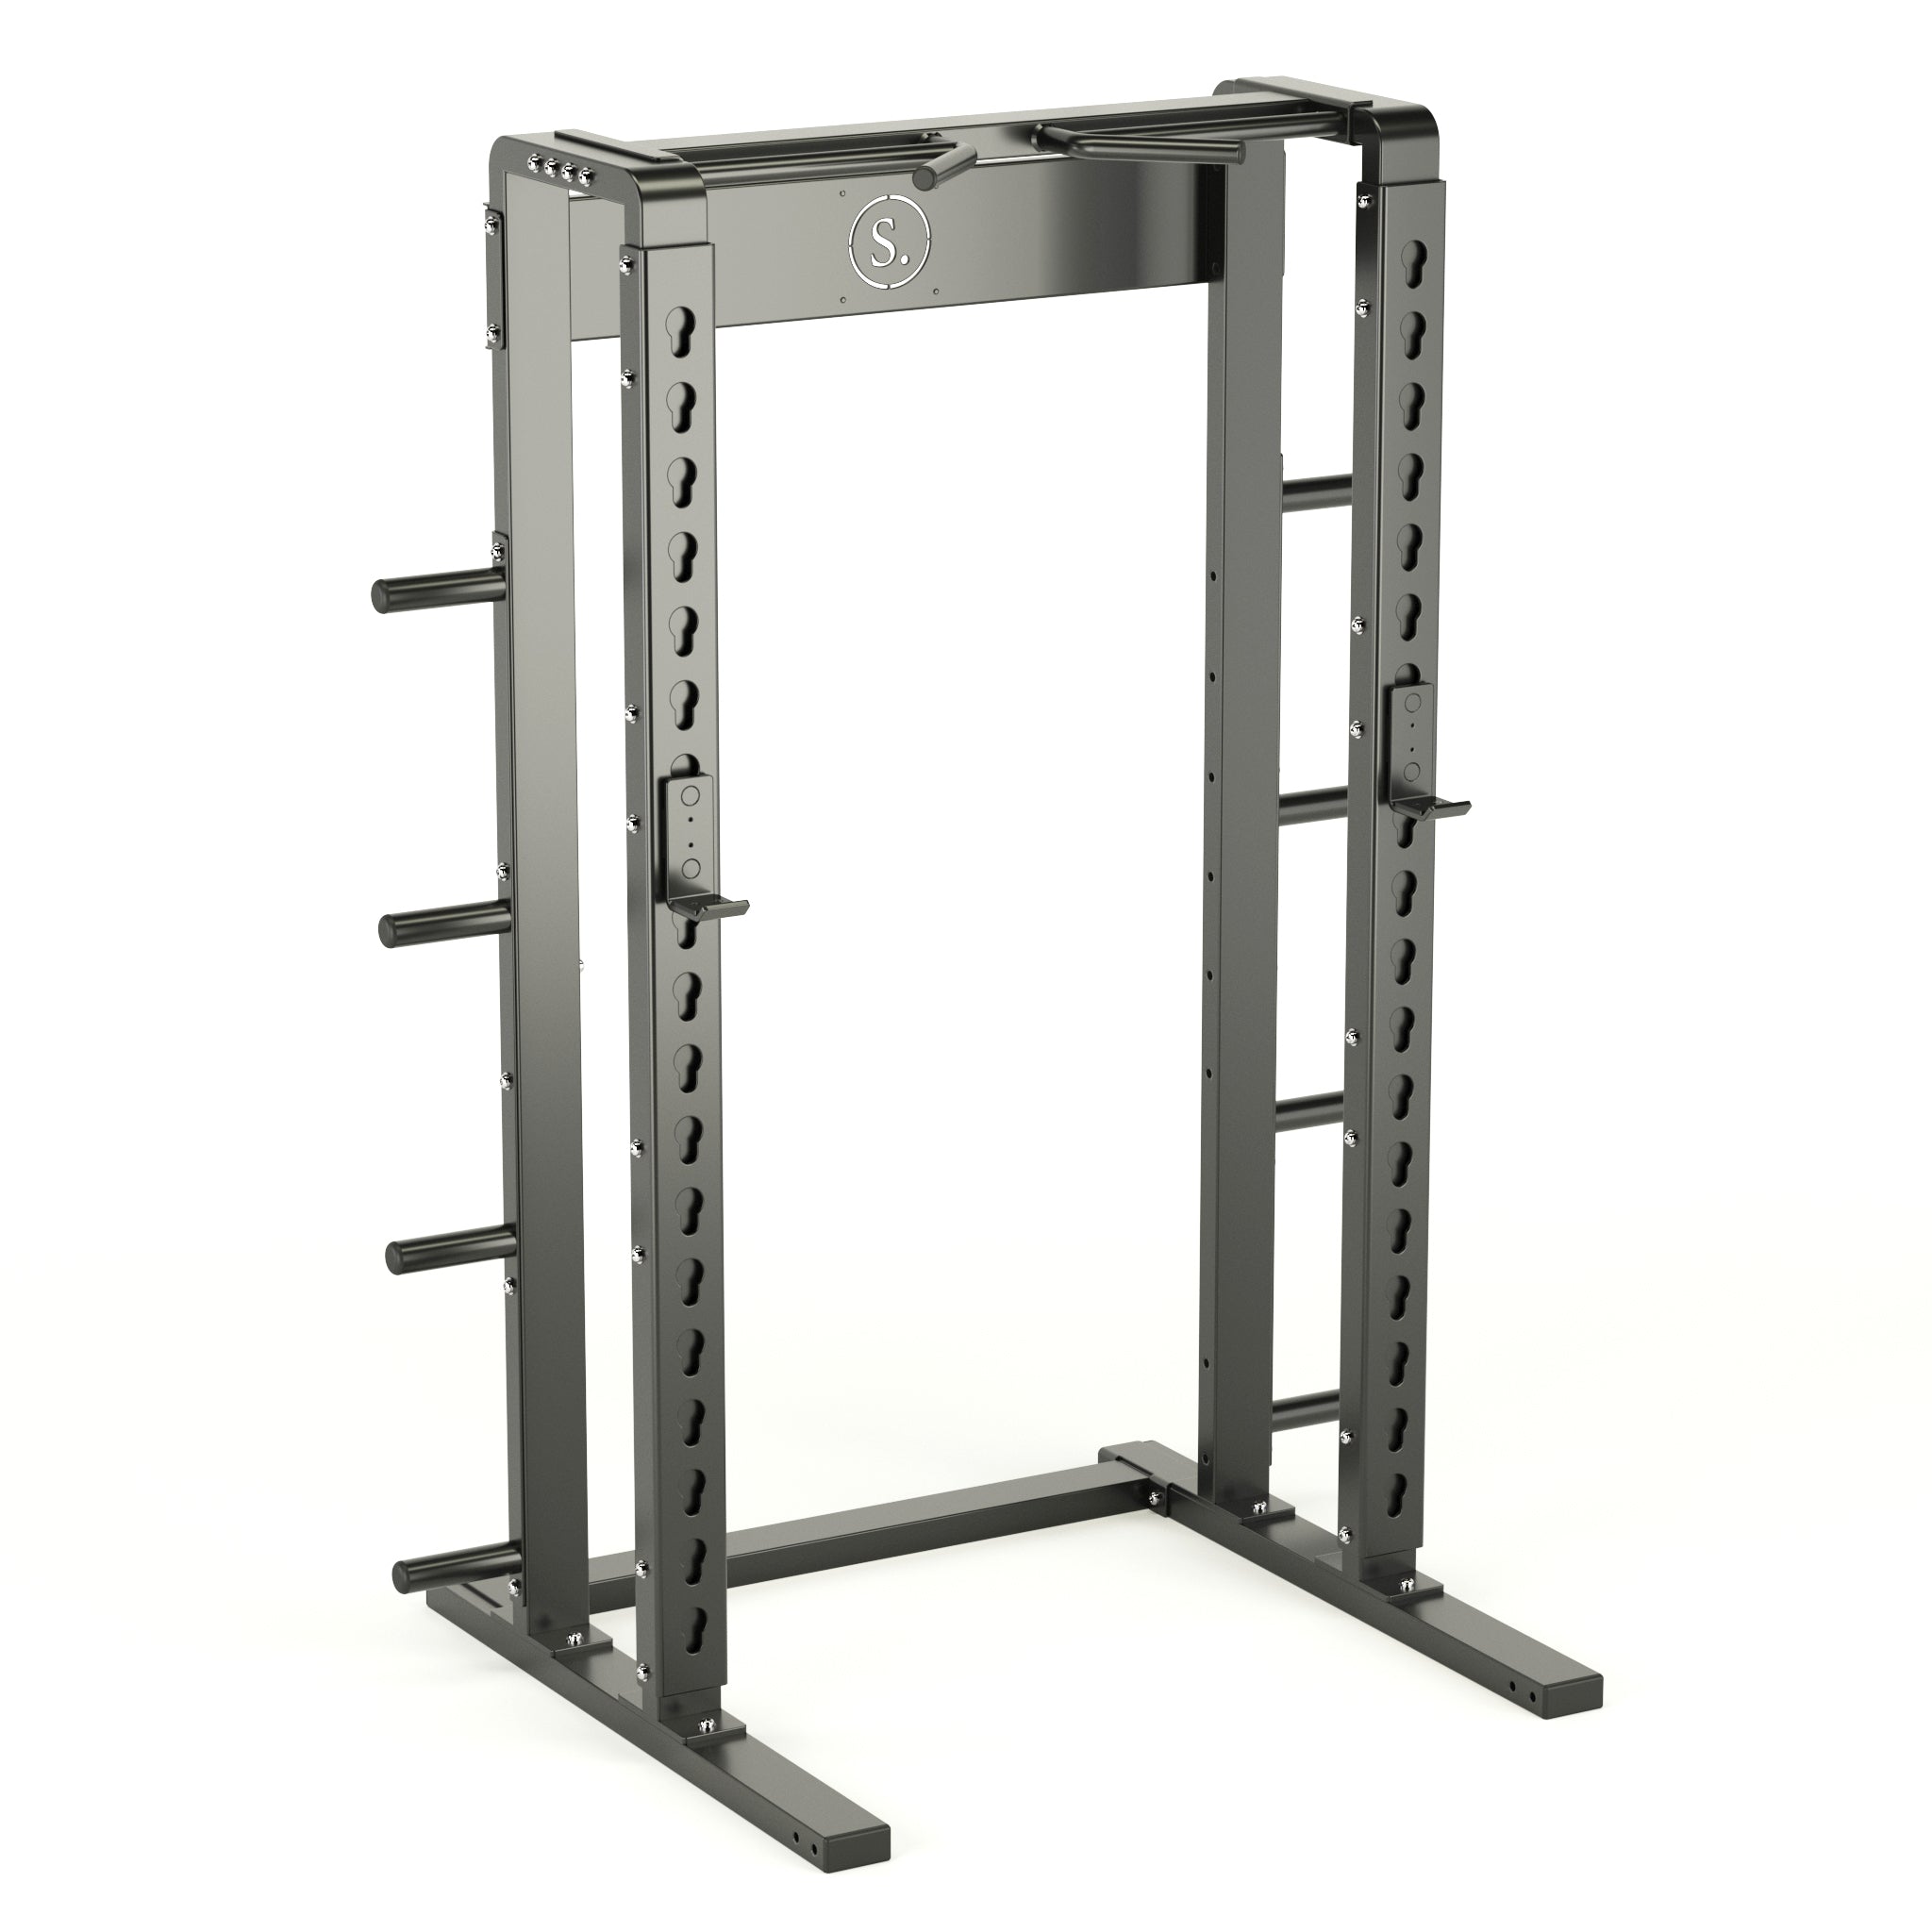 Solo Squat Rack in black with multi-grip pull-up and weight horns